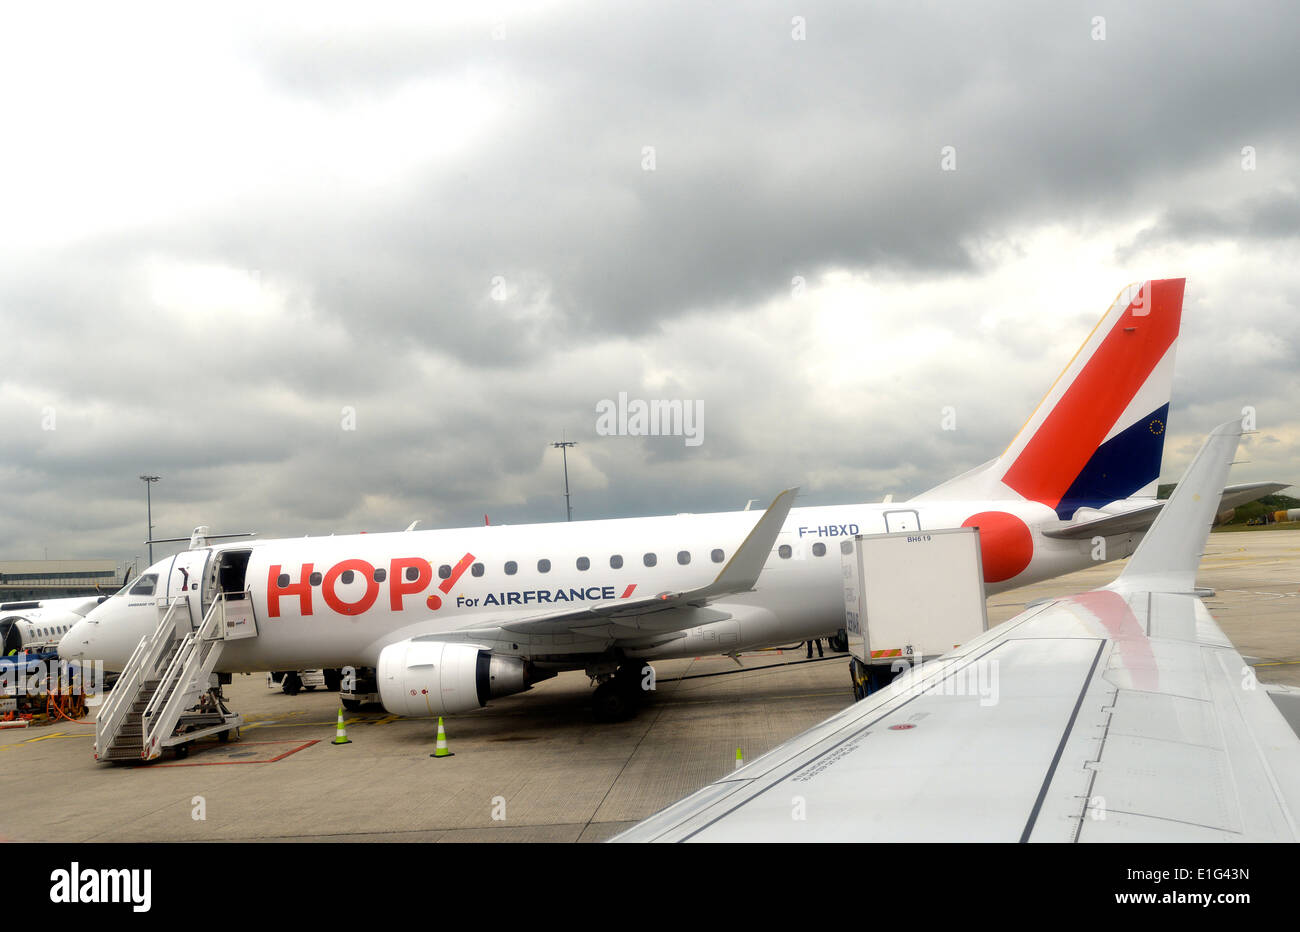 Embraer 170 Airplane Of Hop For Air France Roissy Charles De